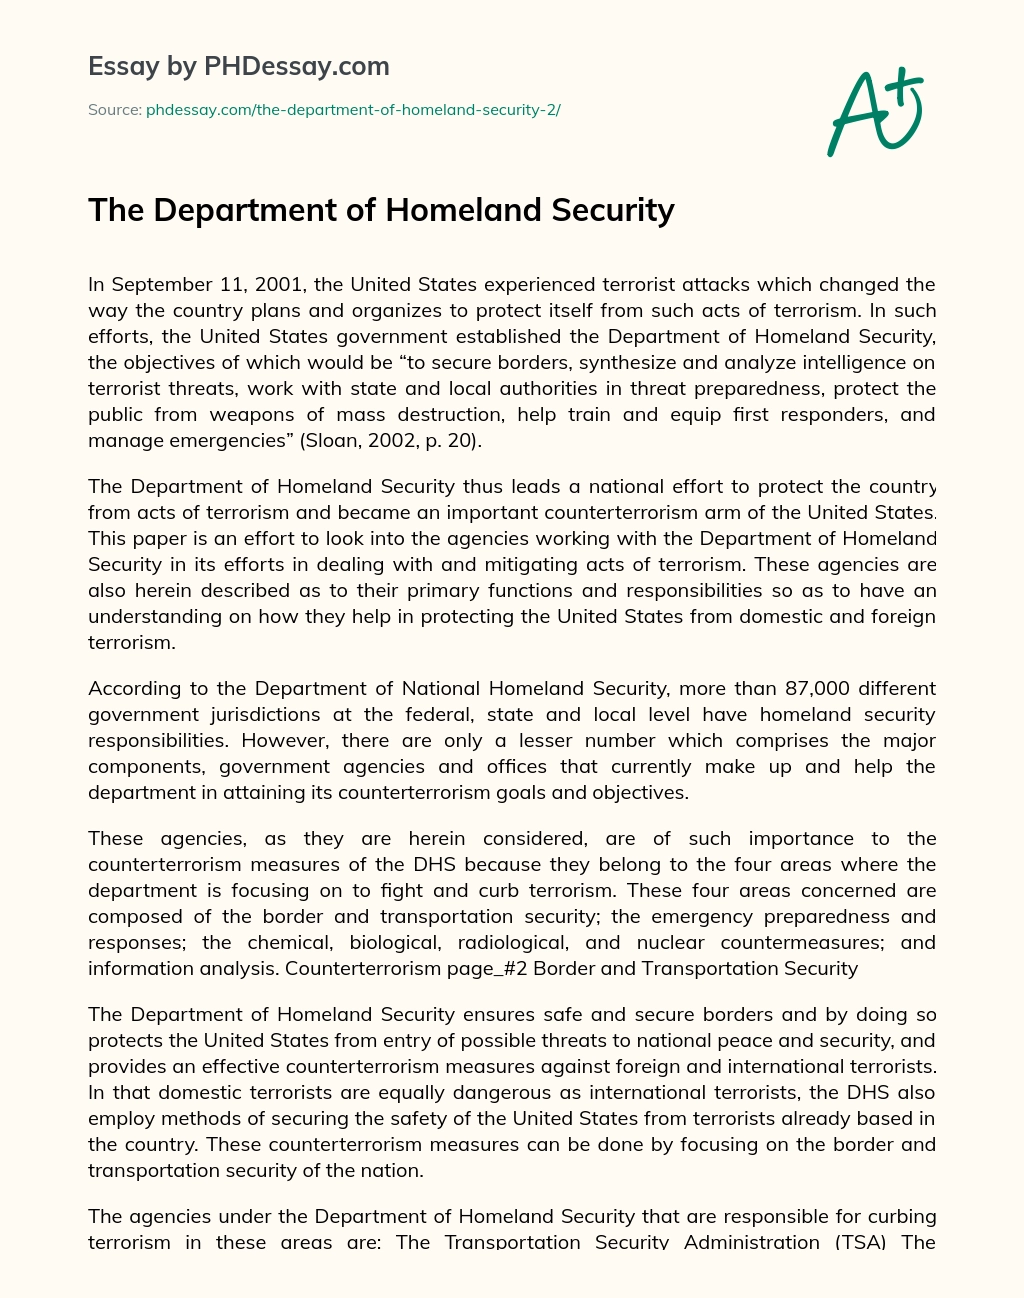 The Department of Homeland Security essay